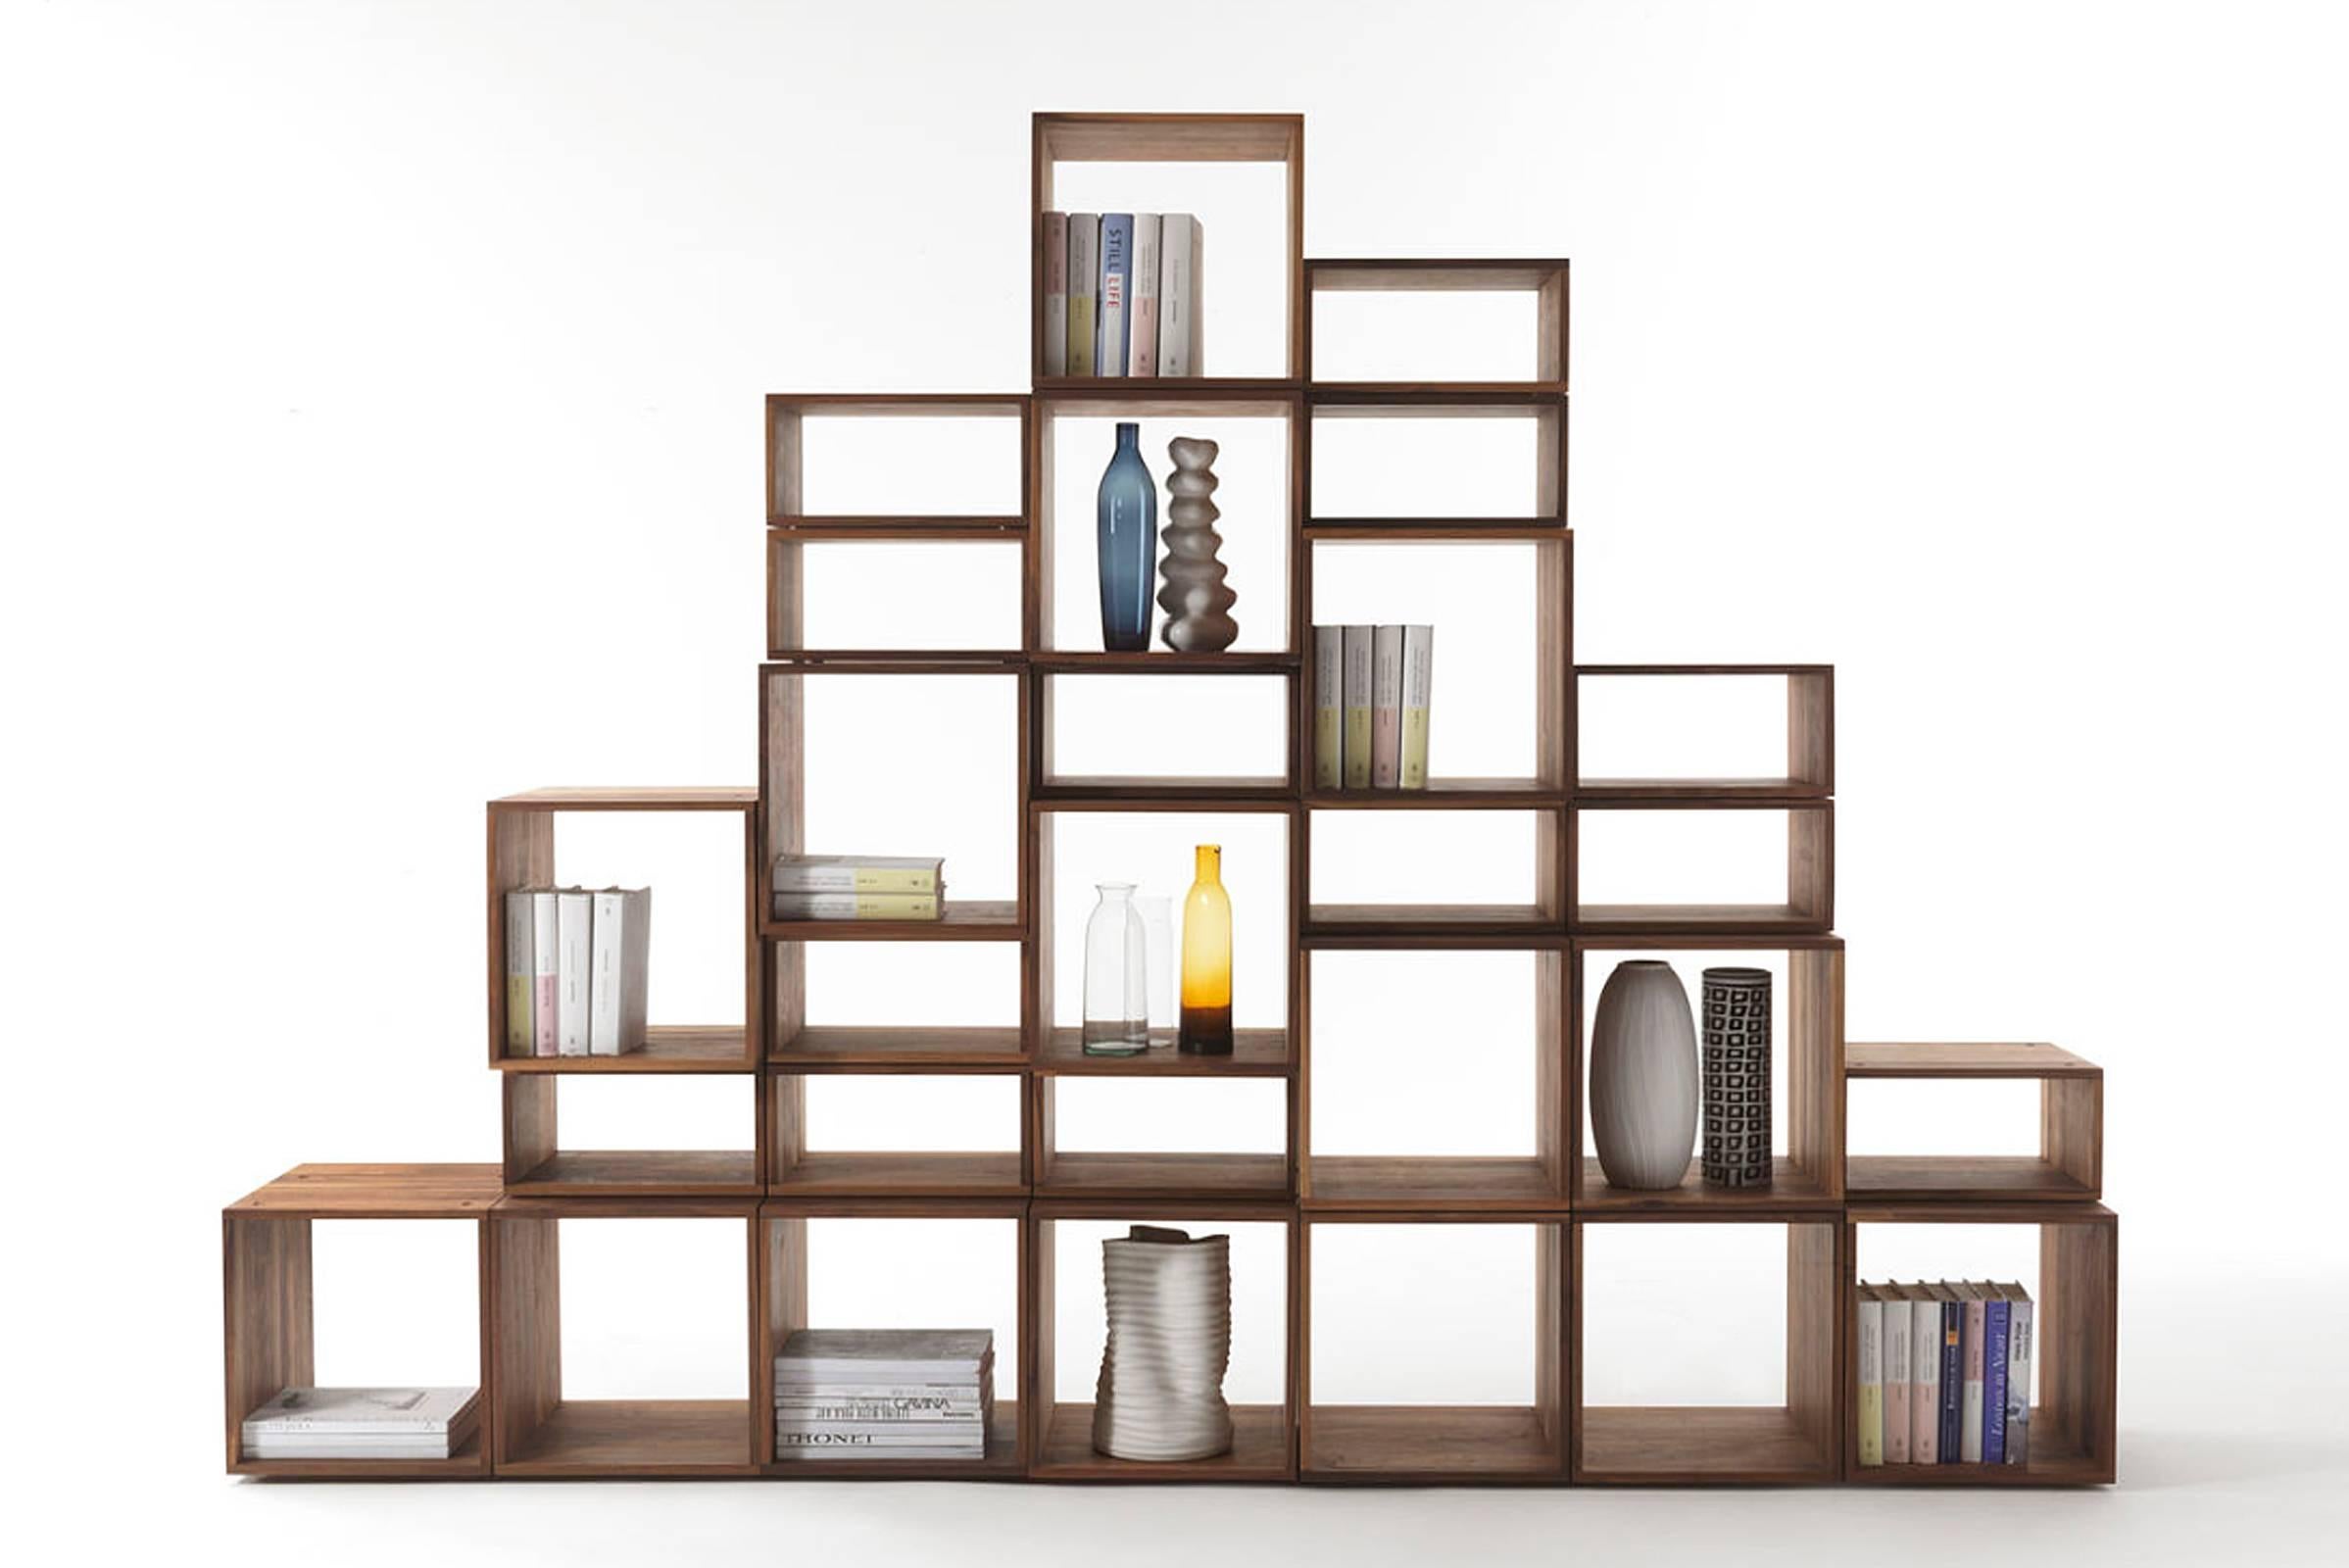 Bookcase free in solid walnut wood made with 28 free boxes,
15 square free boxes and 13 rectangular free boxes.
(For Pyramidal bookcase), price: 19500,00€.
Available in solid oak, on request.
Also available on request with:
or 34 boxes, 14 square